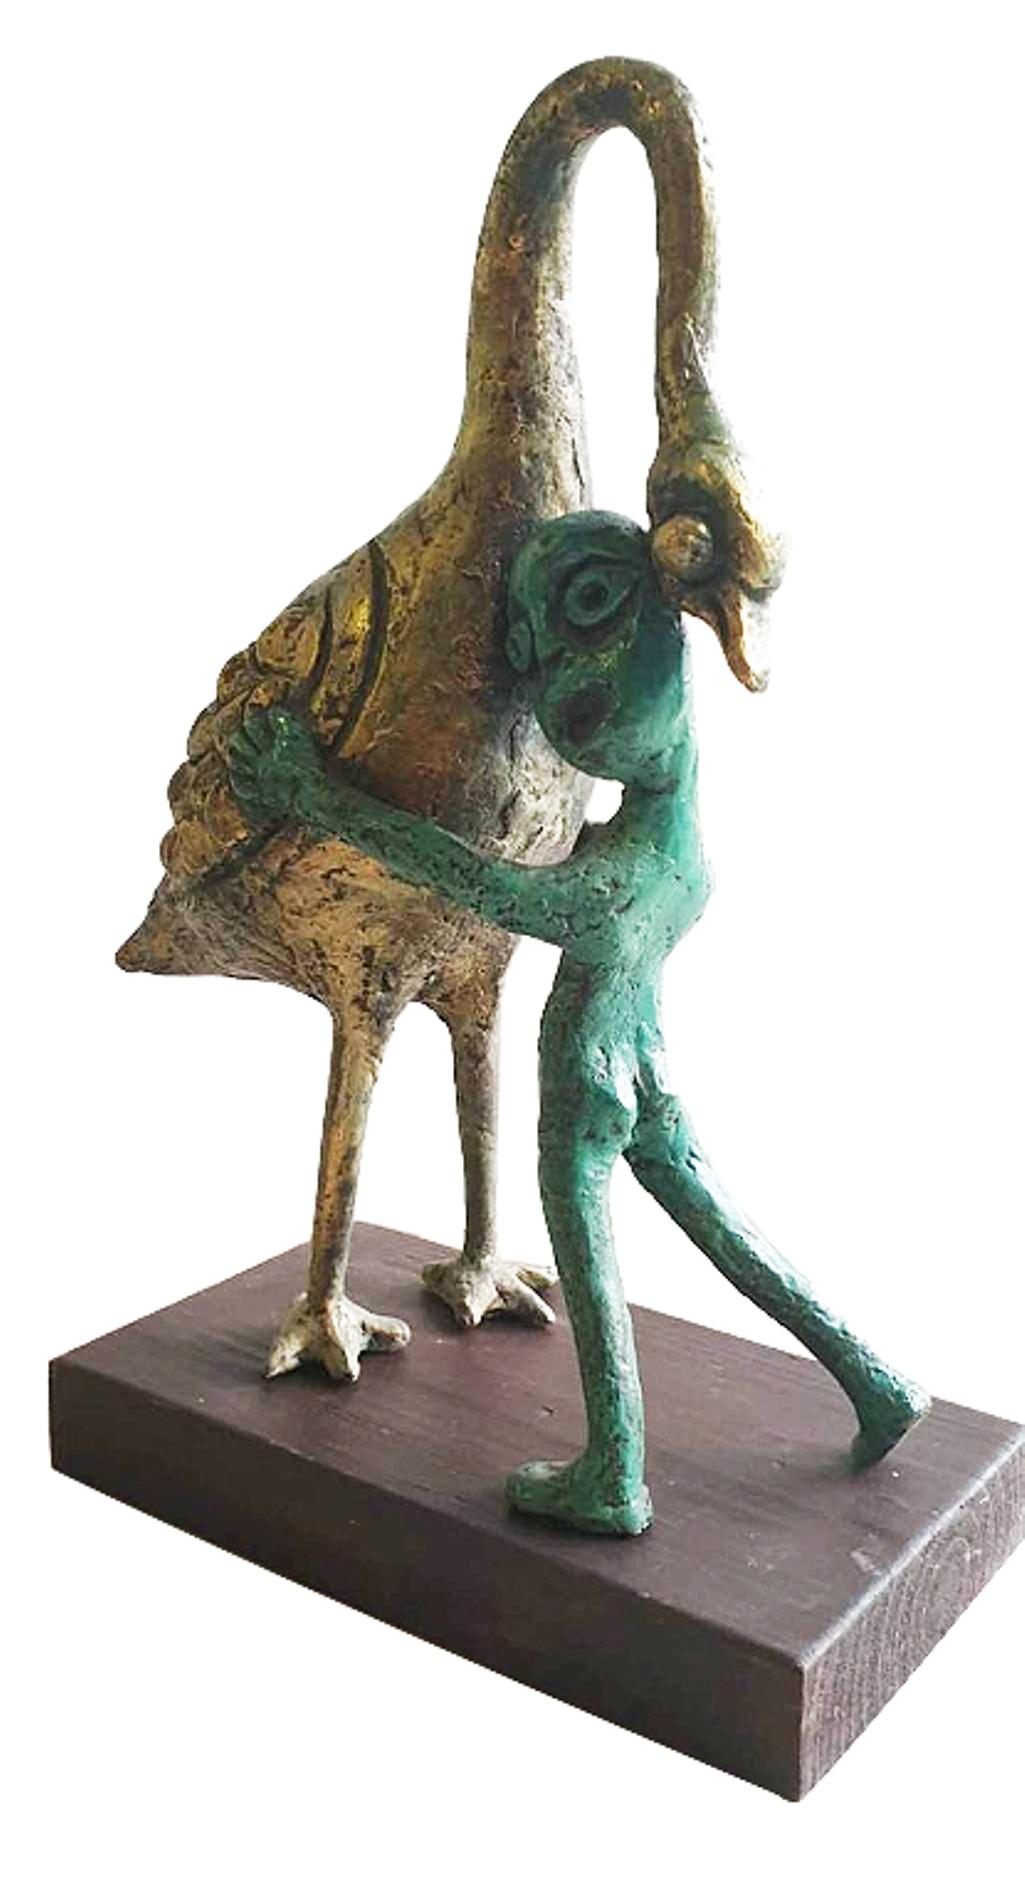 Subrata Biswas - Innocent Life
Bronze, H 9.5 x W 7 x D 3 inches

Style : The motive of a child in its most basic form appears quite repeatedly in the works of Subrata Biswas. The elementary human form representing the child complements innocence,